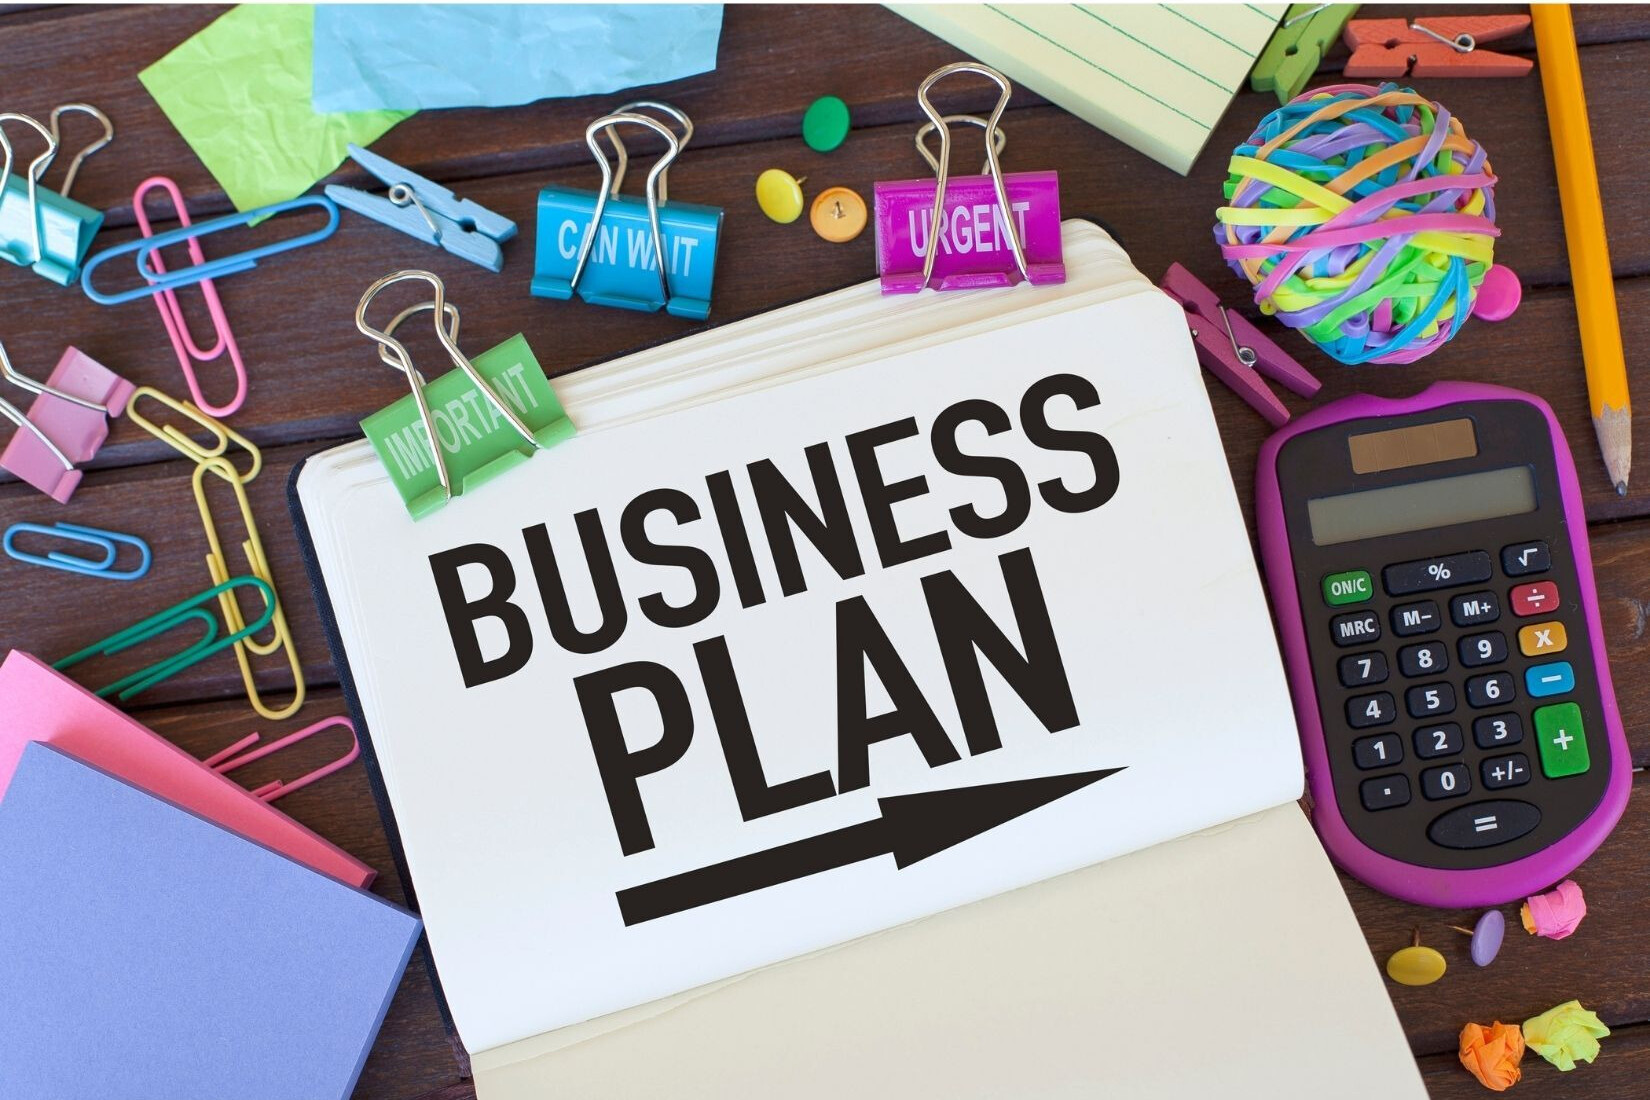 Graphic featuring the words "business plan" with office supplies surrounding graphic.